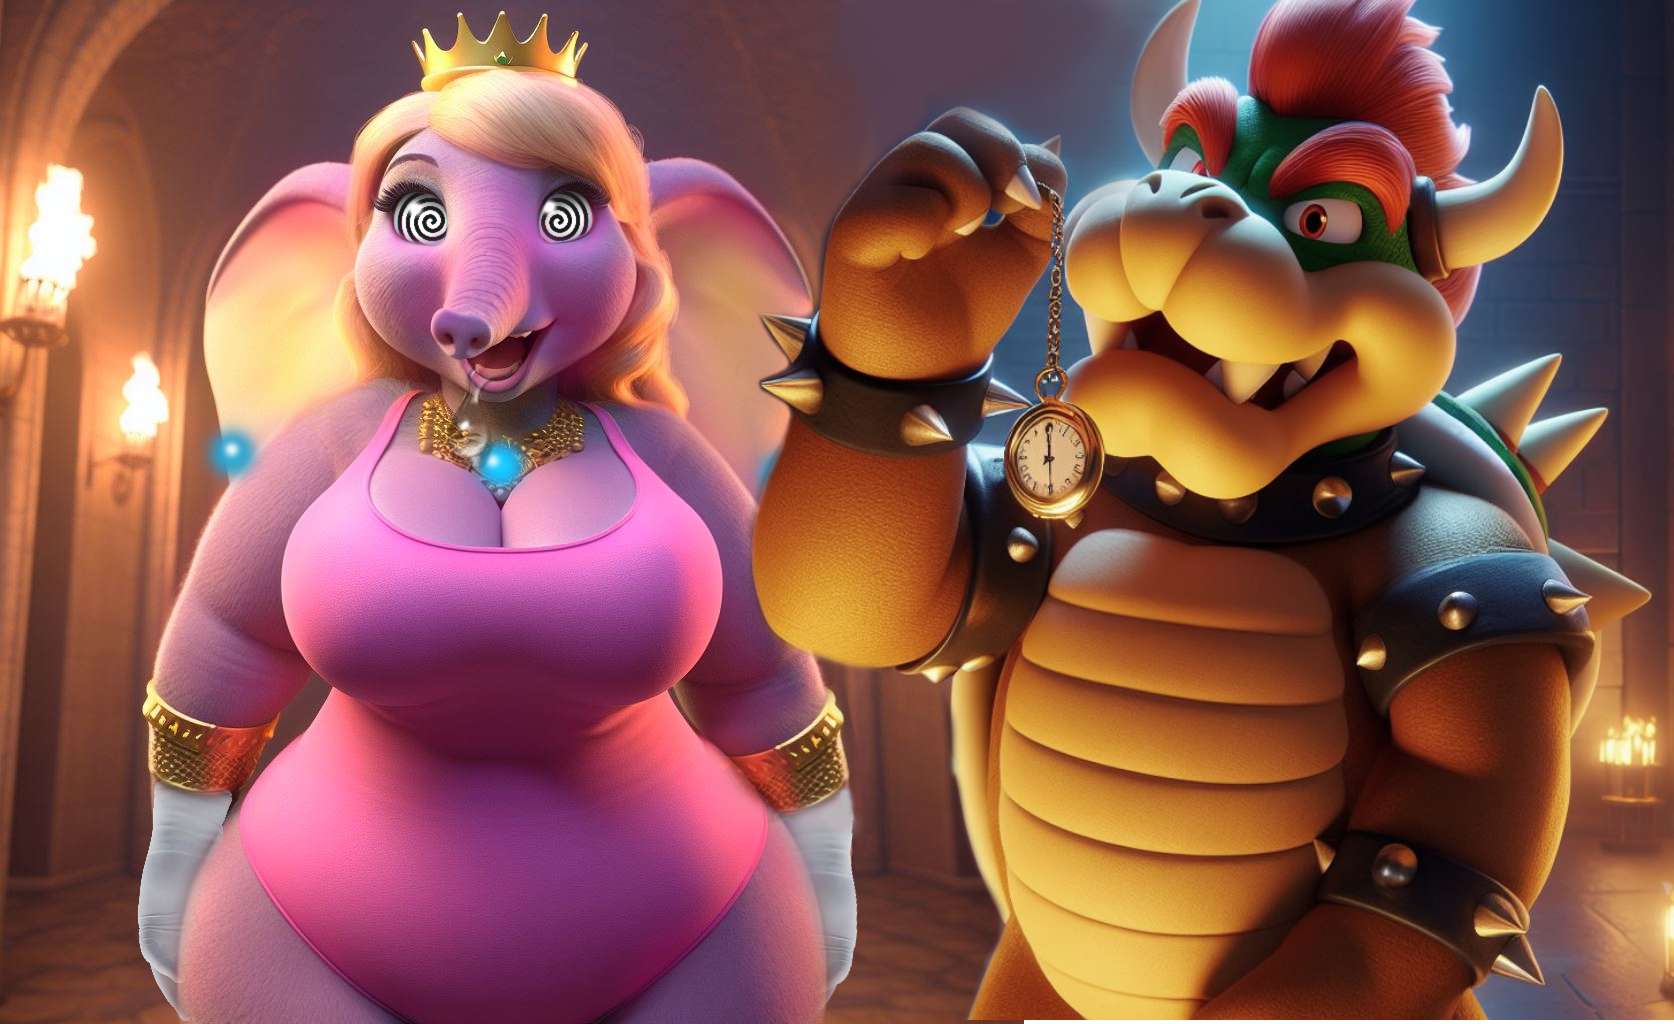 Bowser isn't up to the tusk of wooing elephant Peach in this Super